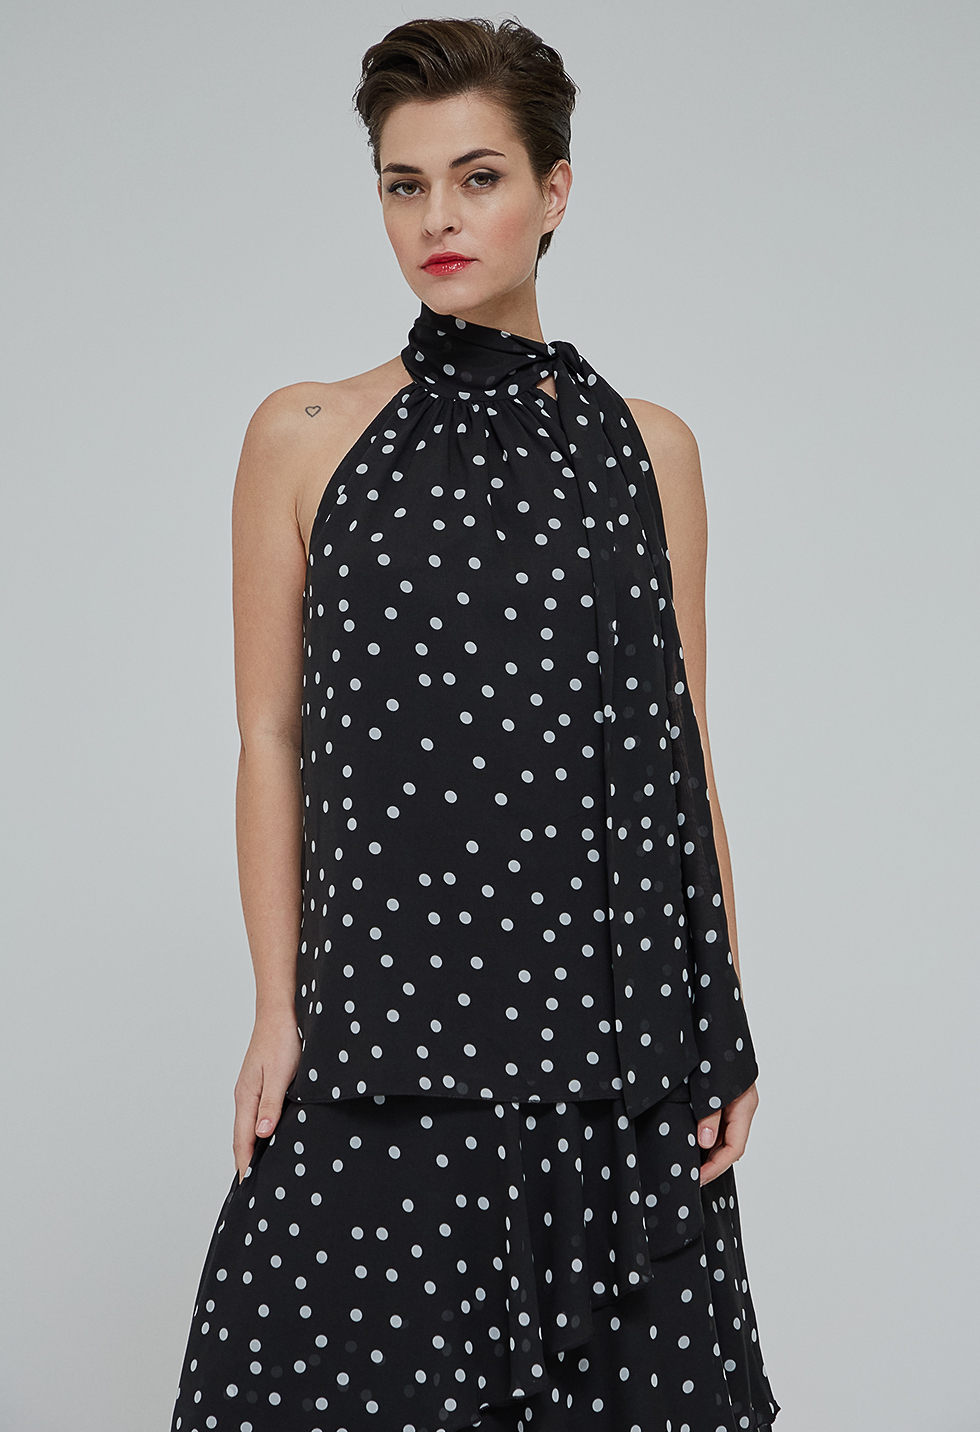 Polka dot blouse with tie-neck.